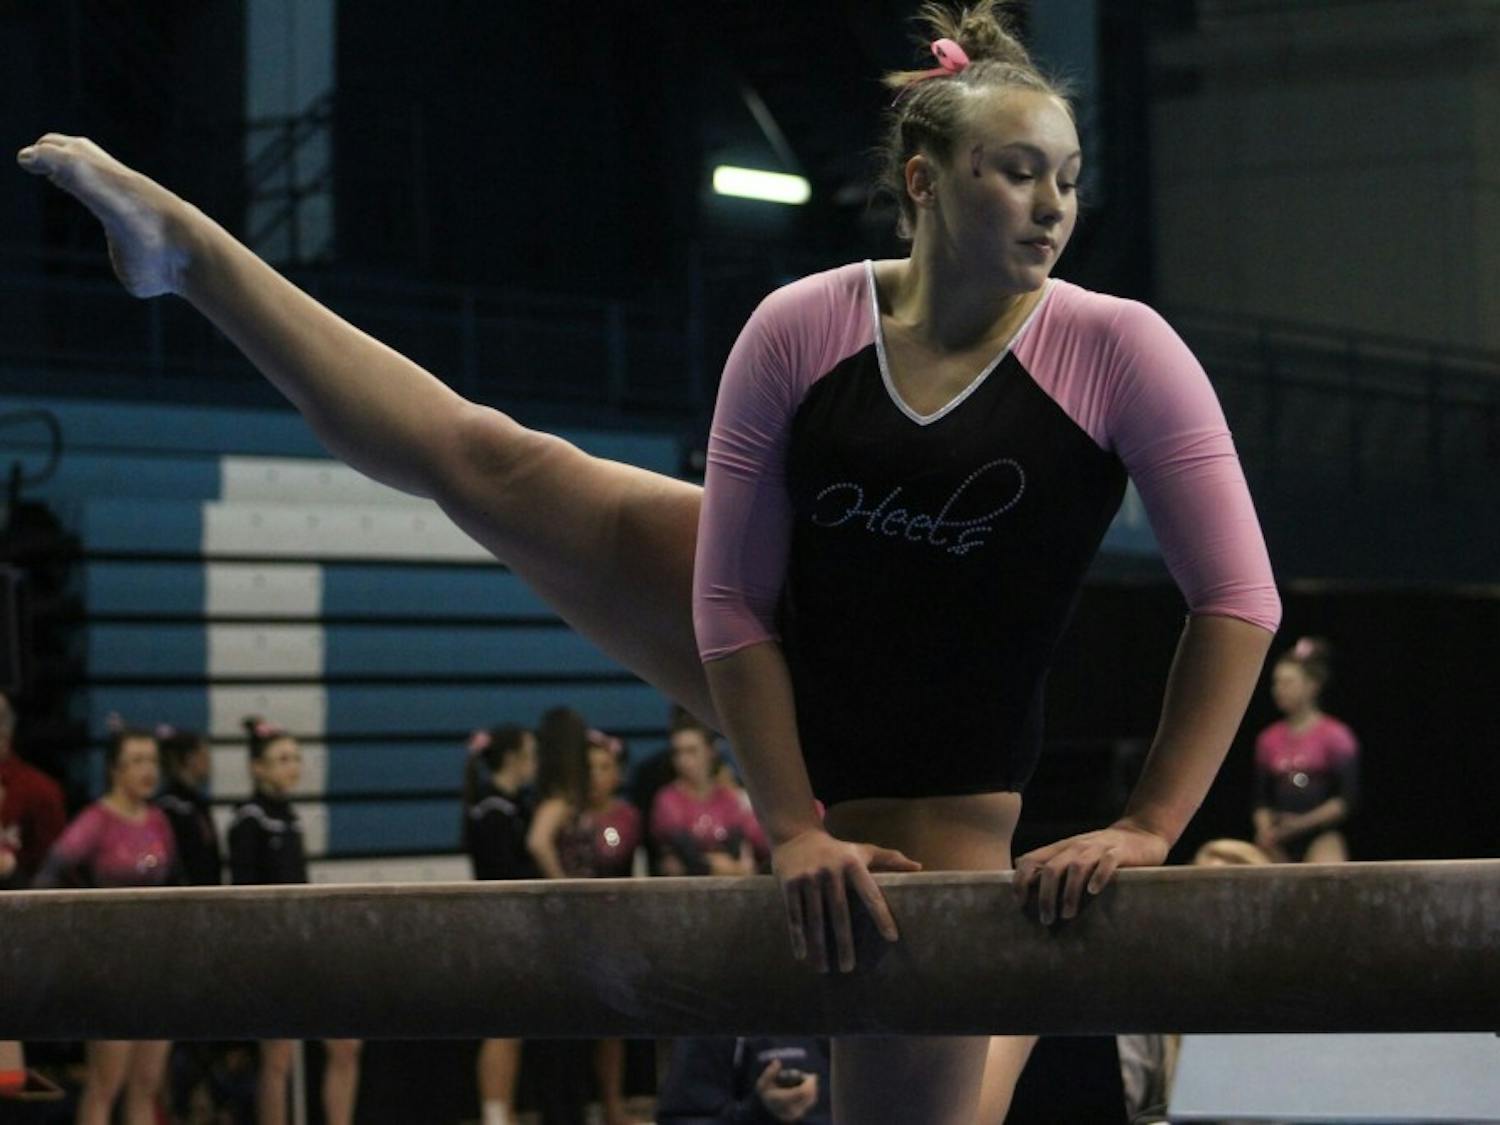 Senior Kaitlynn Hedelund competes against Brown during a North Carolina gymnastics meet on Feb. 19 in Carmichael Arena.